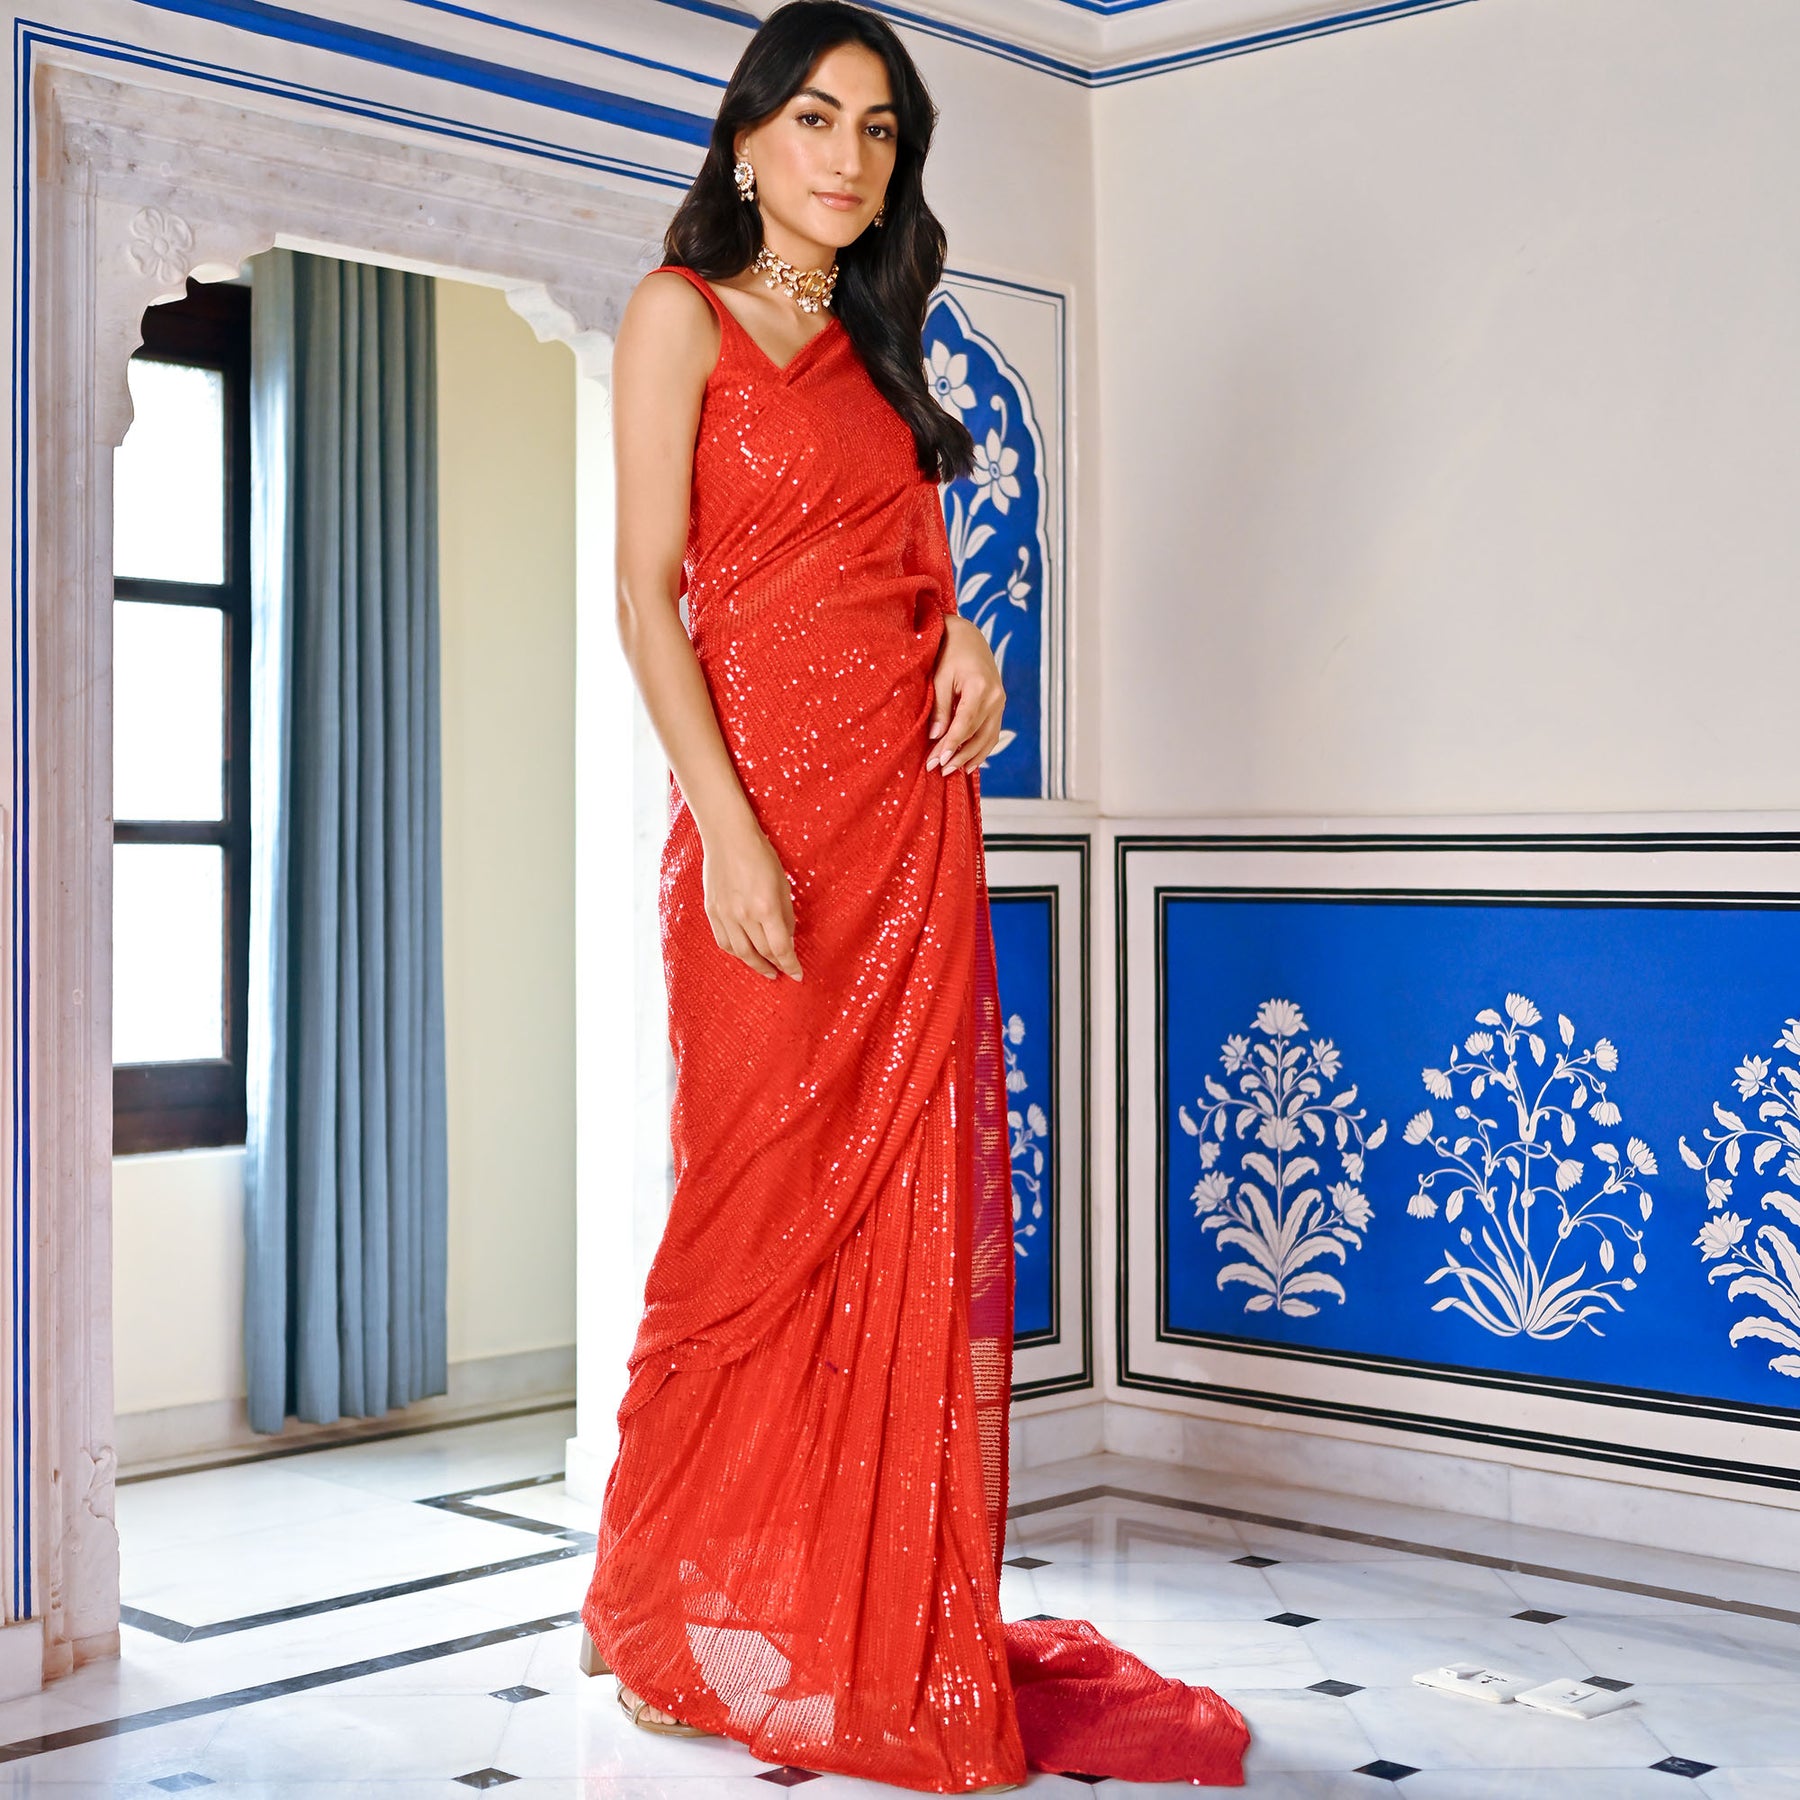 Red Saree - Buy Red Color Fashion Sarees Online | Myntra